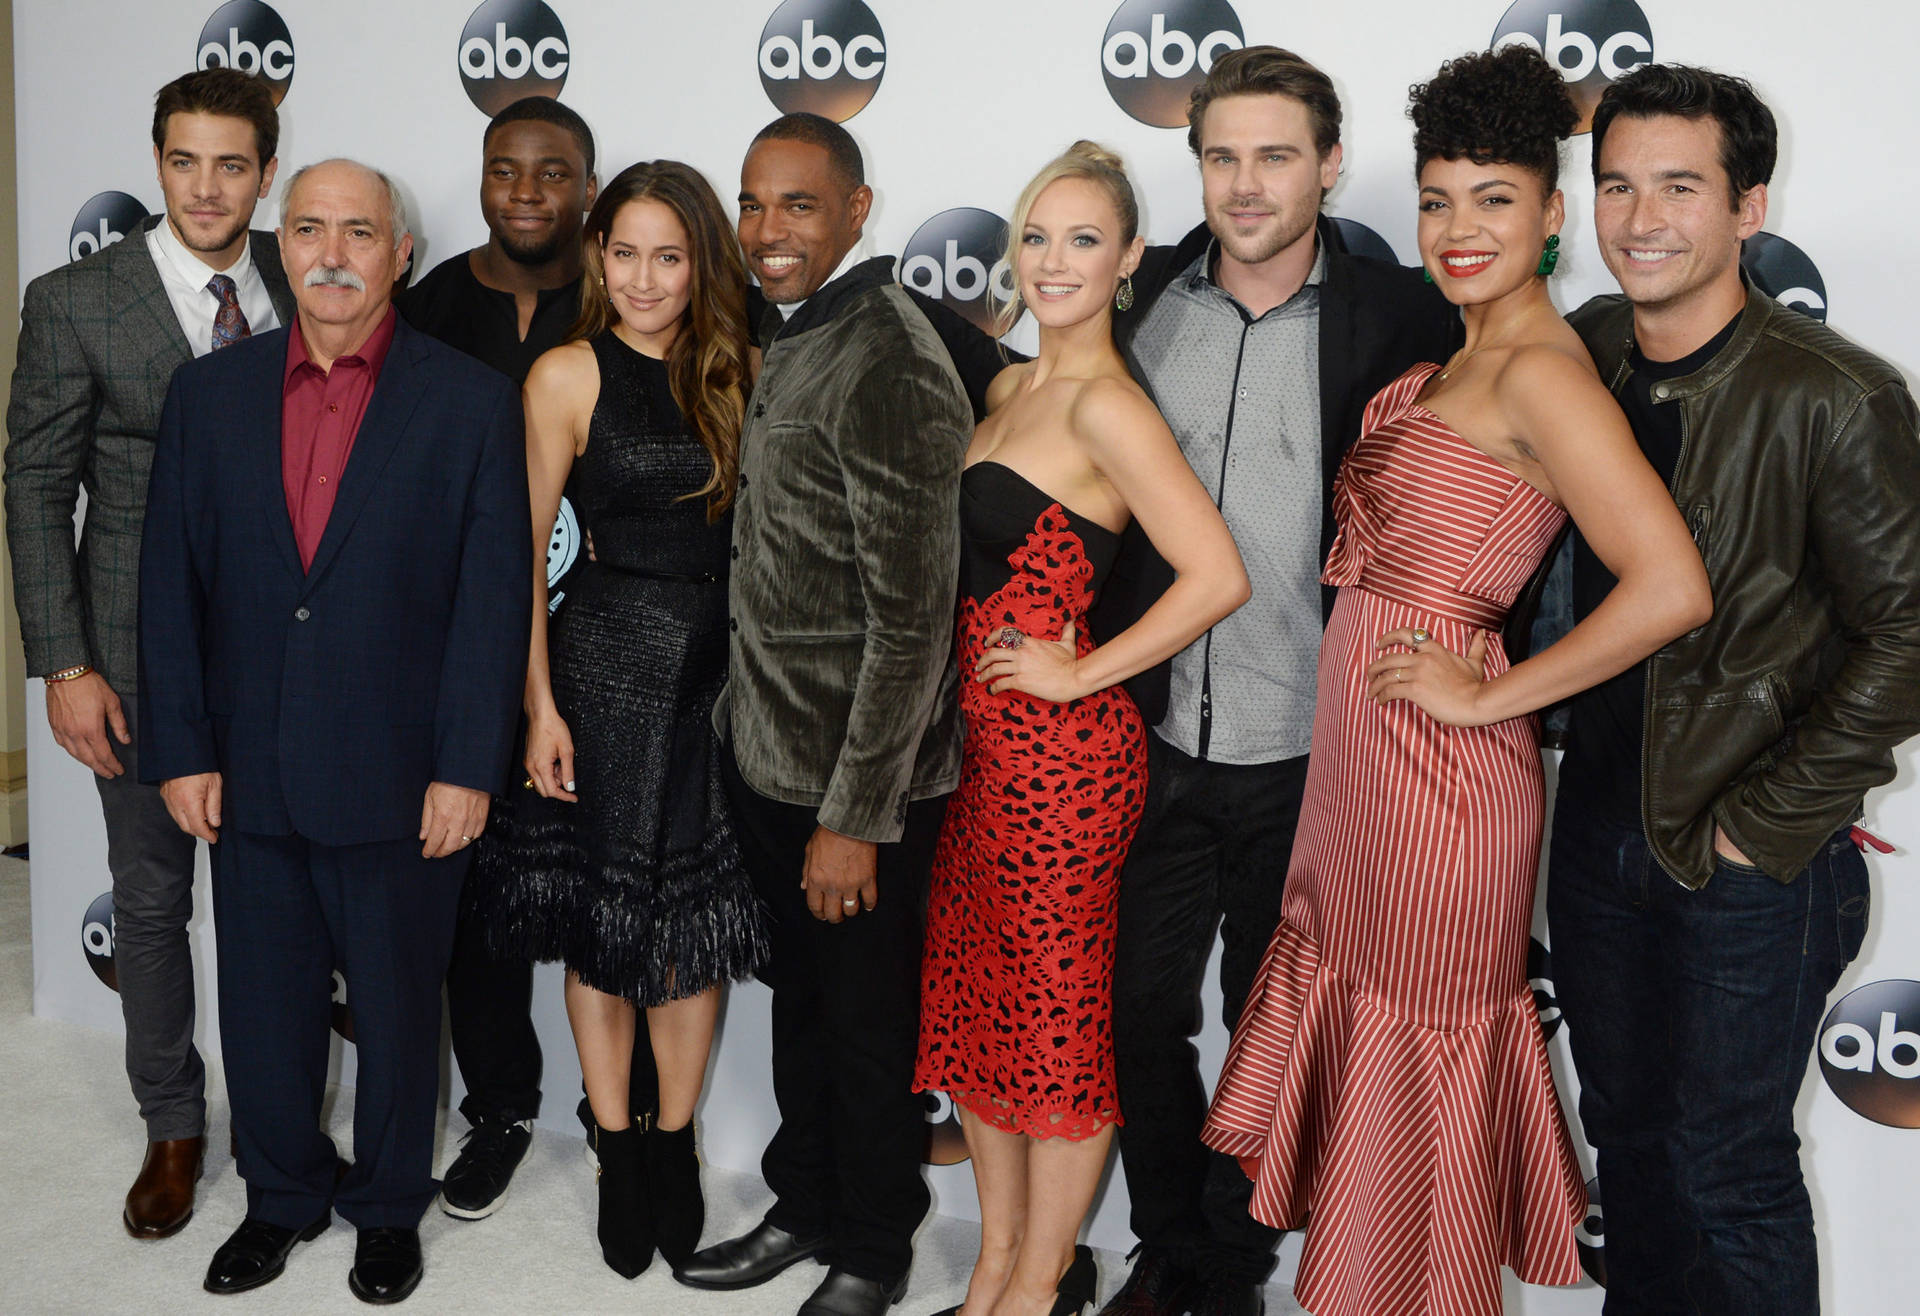 Captivated cast of ABC's Station 19: A moment from the premiere. Wallpaper